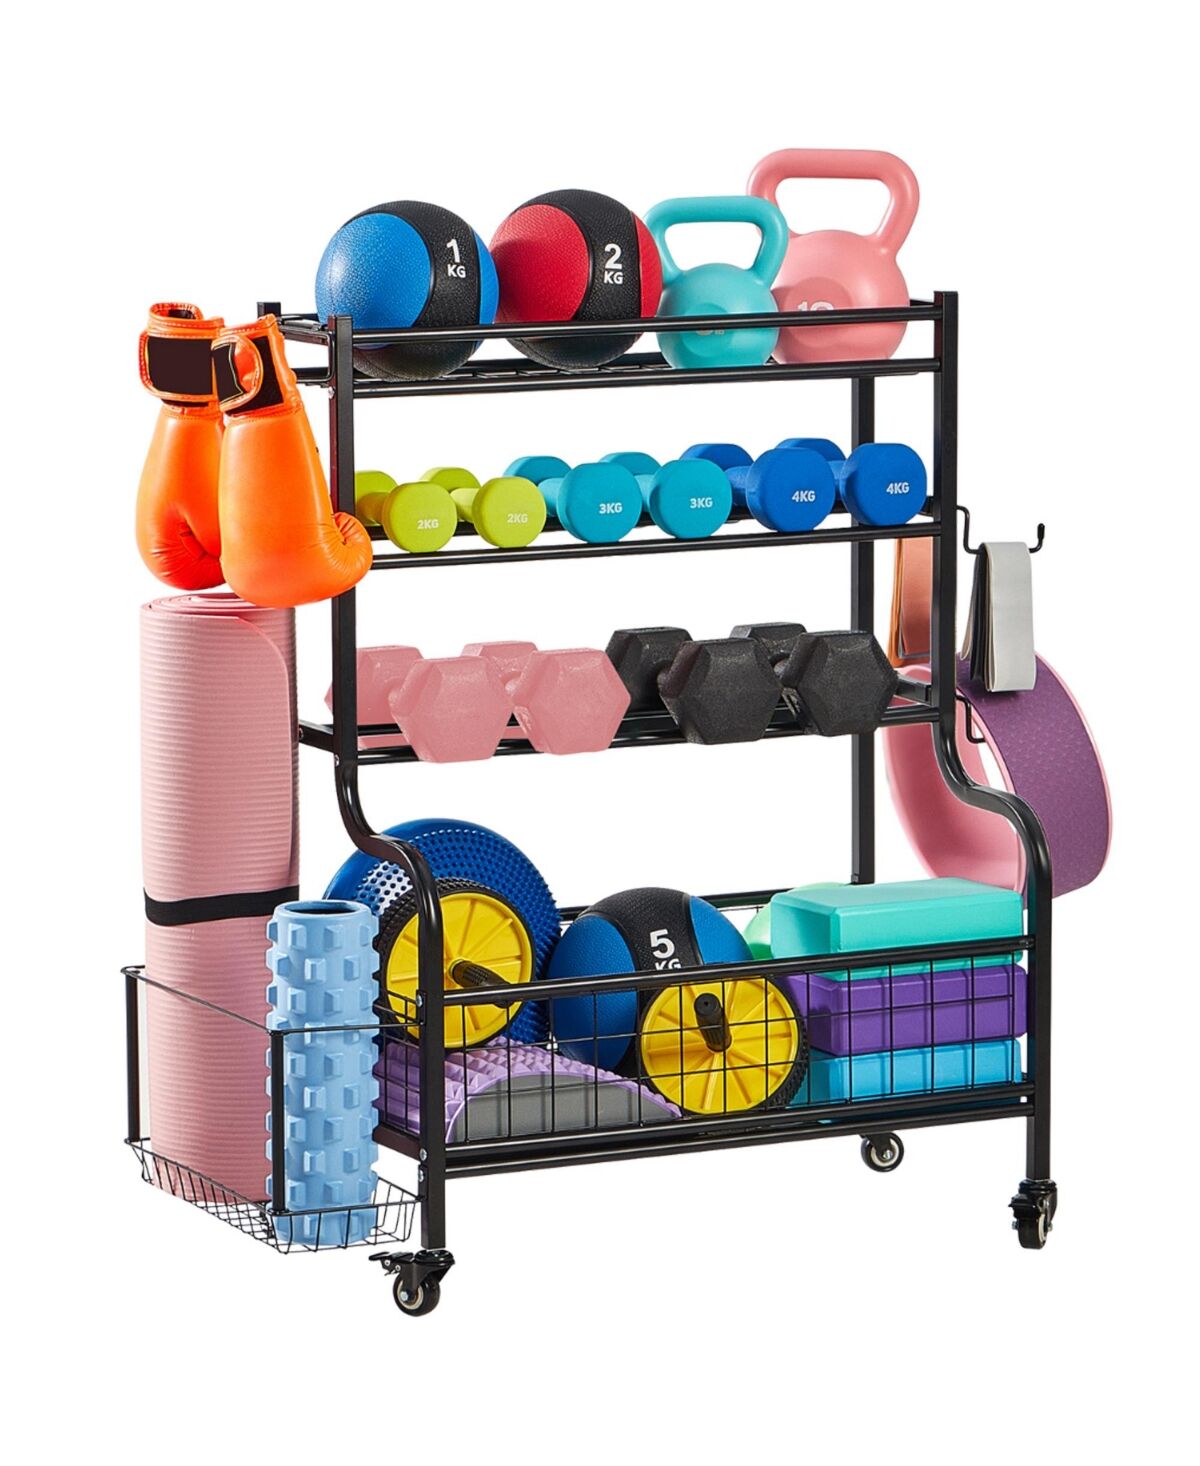 Lugo Heavy-Duty Heavy Duty Dumbbell Storage Rack & Stand with Wheels and Hooks - Black